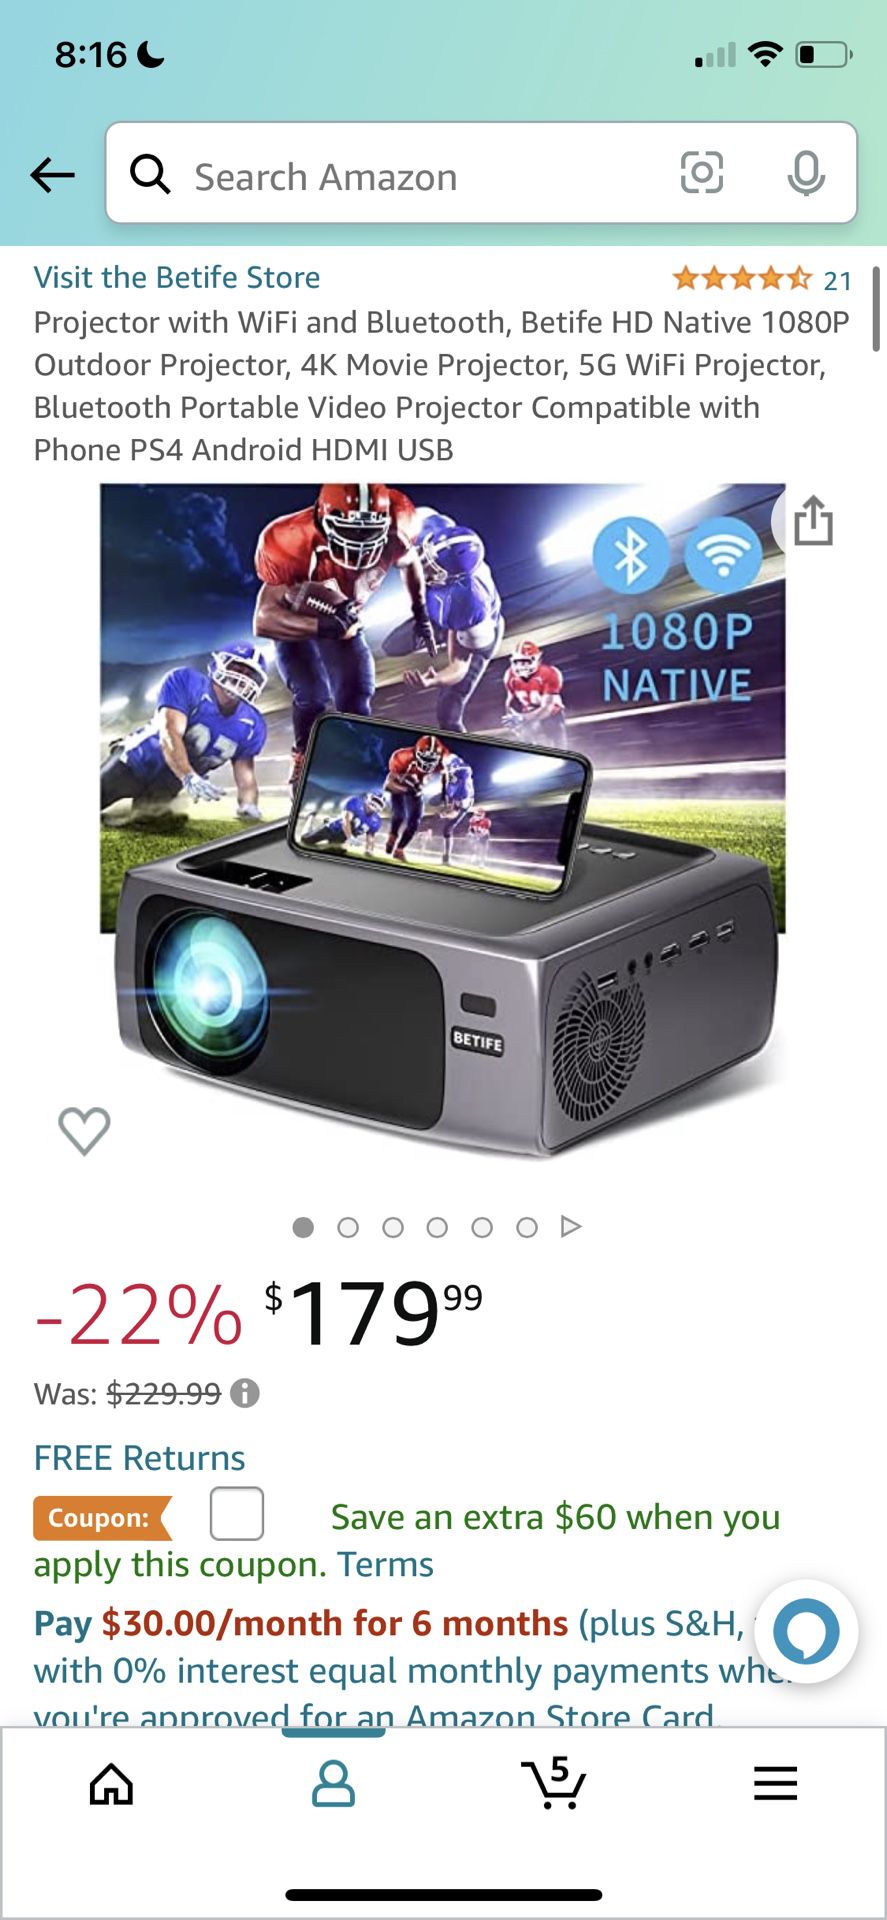 Projector with WiFi and Bluetooth, Betife HD Native 1080P Outdoor Projector